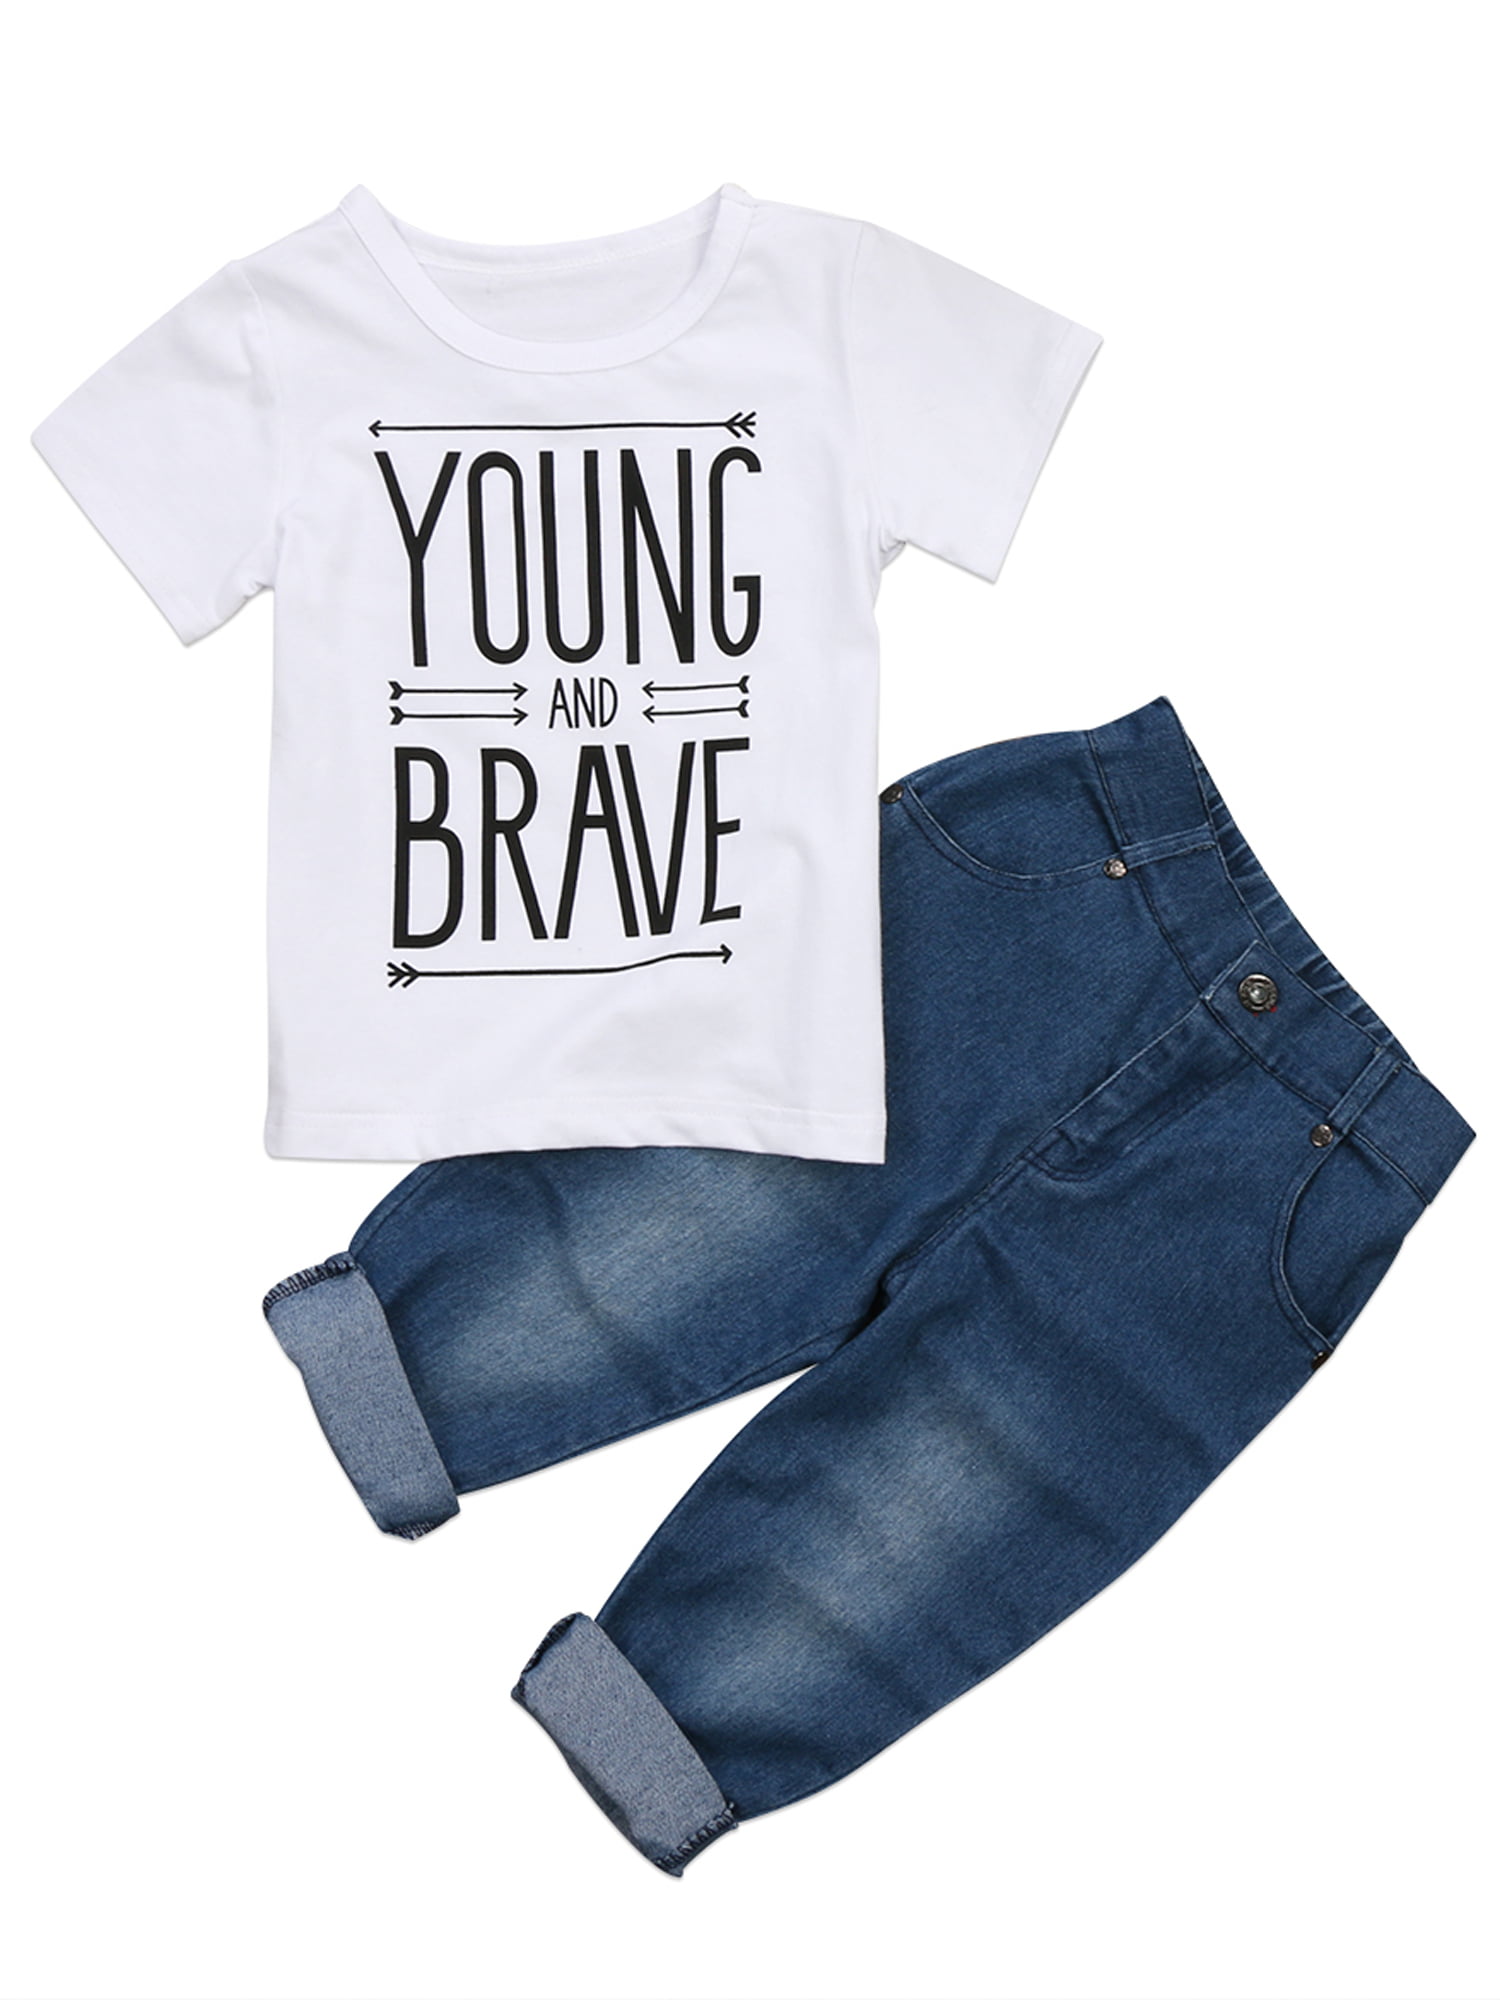 White Vest Top and Denim Shorts Kids New Short Sleeve Cars Outfit Set 3 Psc Age 2 3 4 5 6 7 8 9 10 Years JollyRascals Boys Summer Set 3 Pieces Outfit Check Shirt 